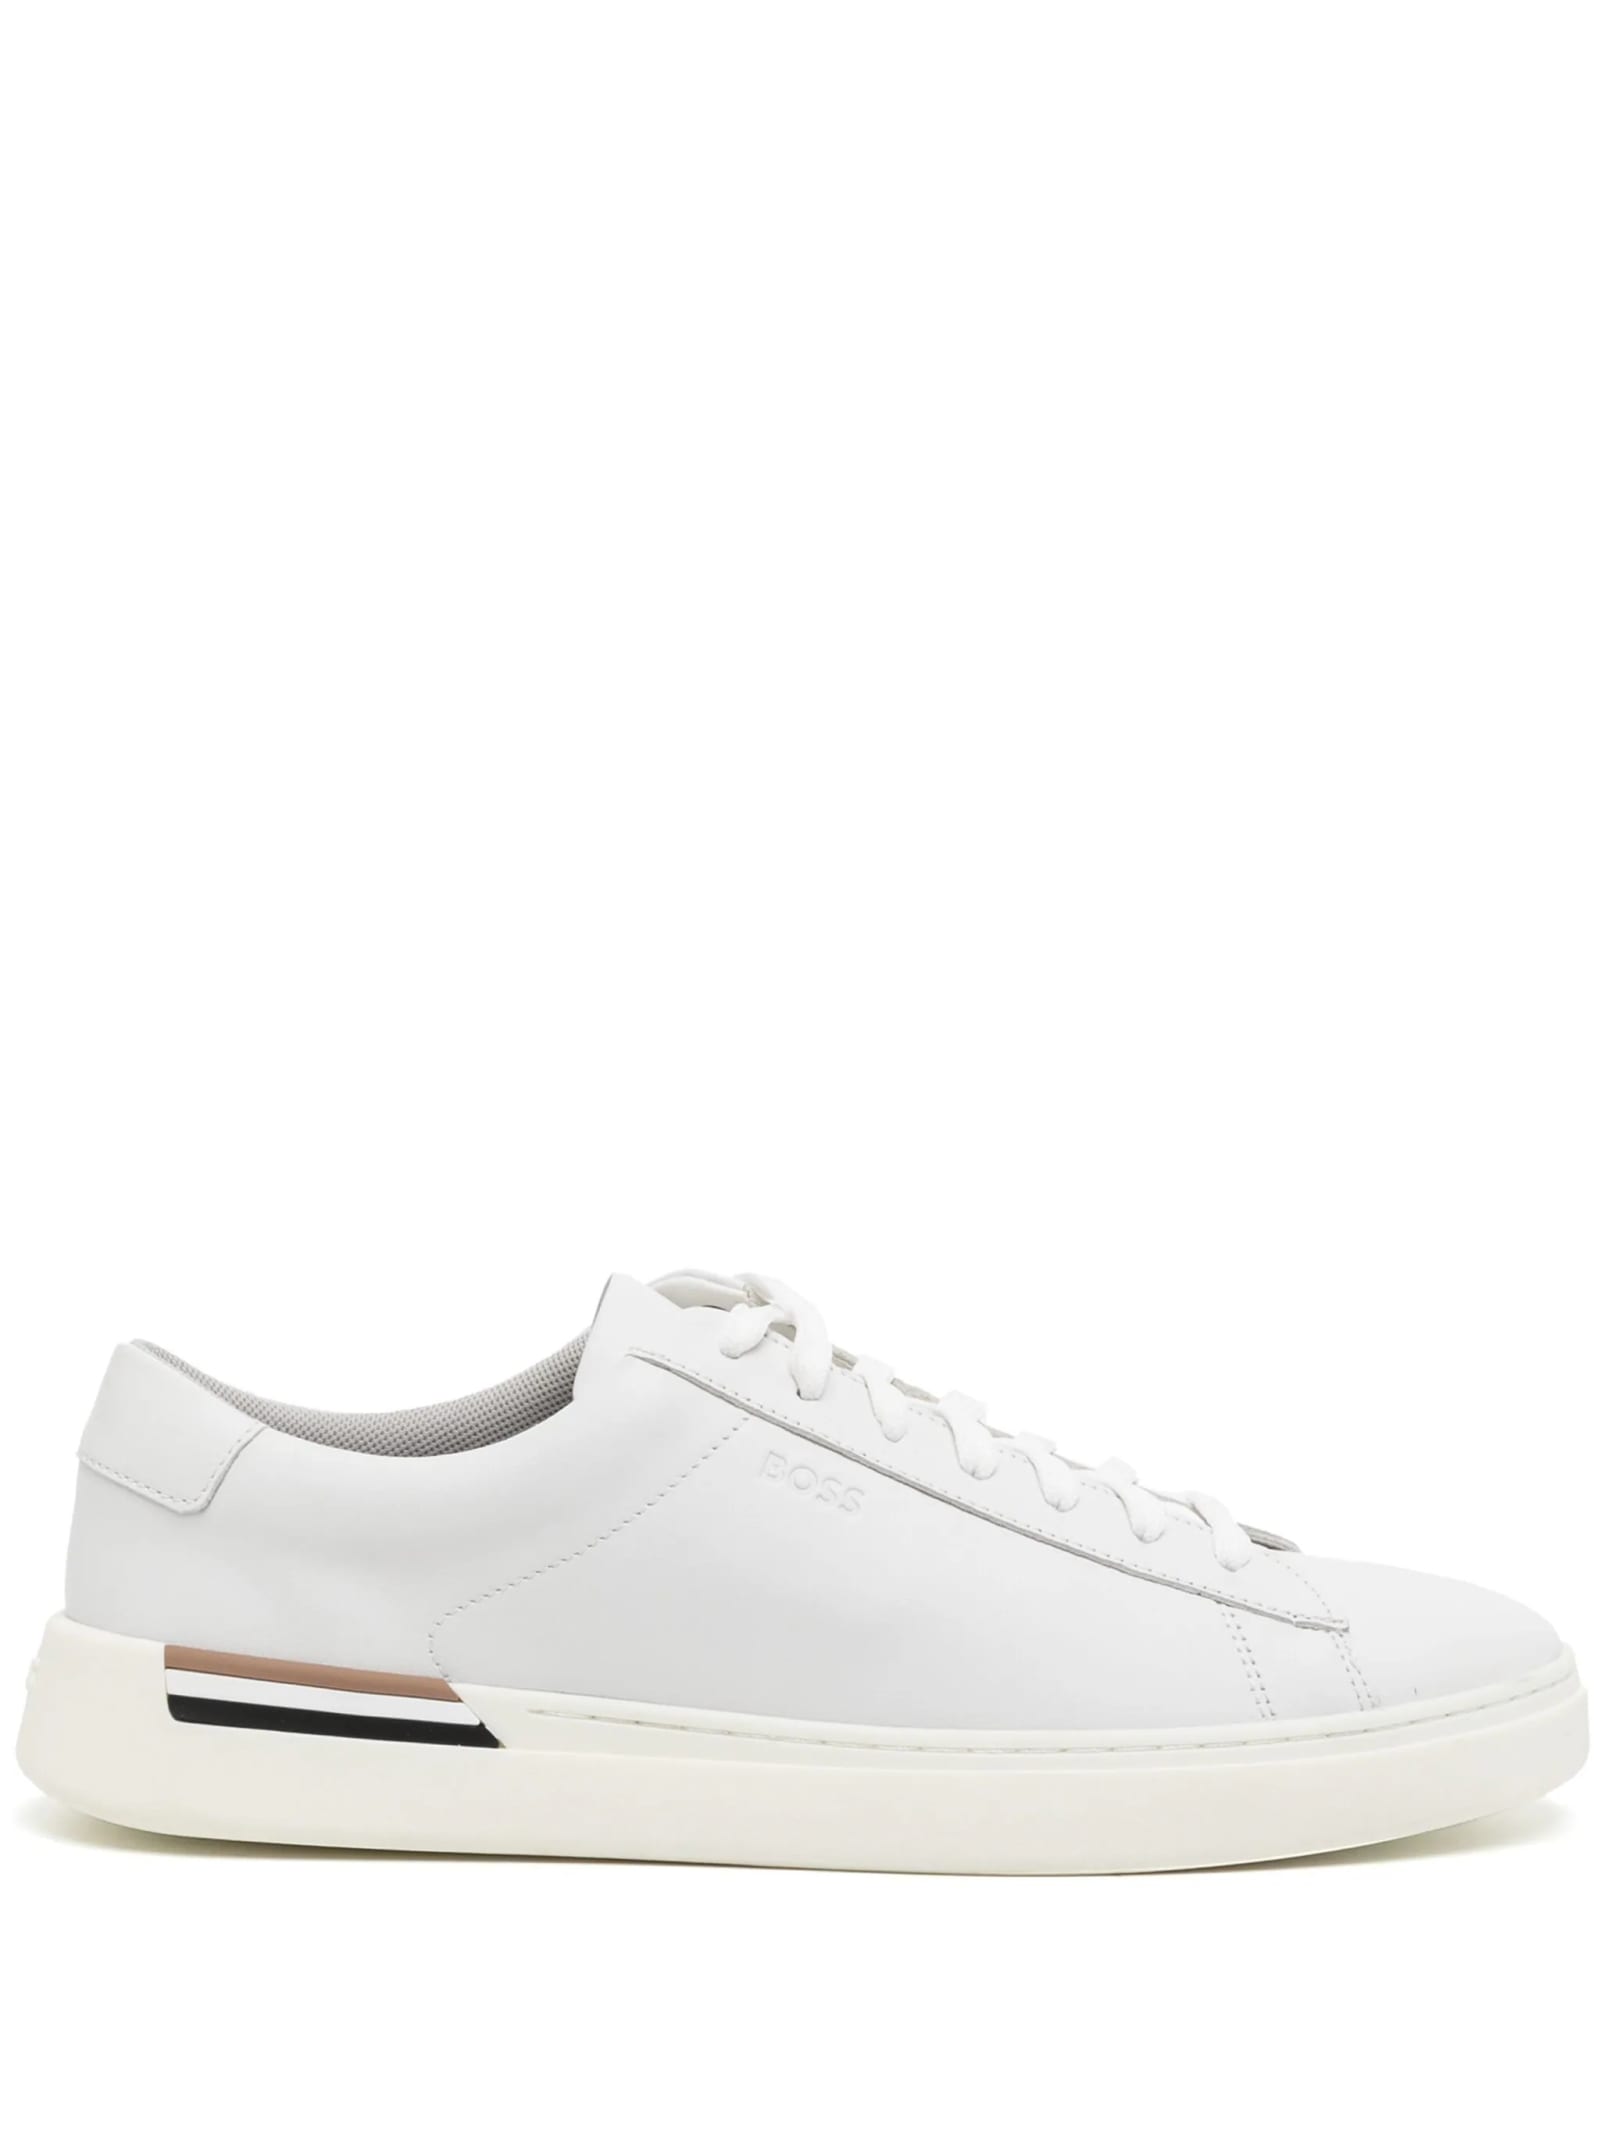 White Leather Sneakers With Preformed Sole, Logo And Typical Brand Stripes